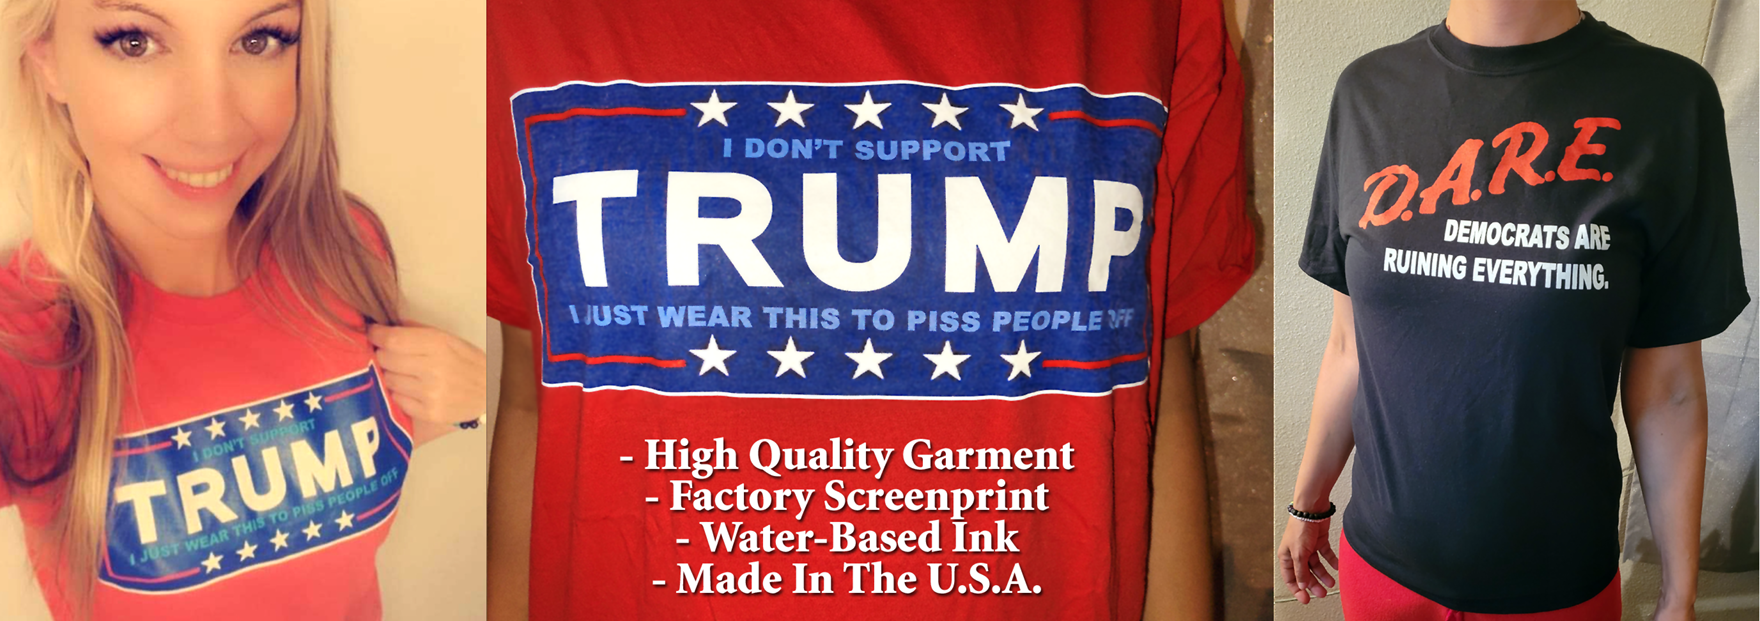 High Quality Garment, Factory Screenprint, Water-Based Ink, Made In The U.S.A.